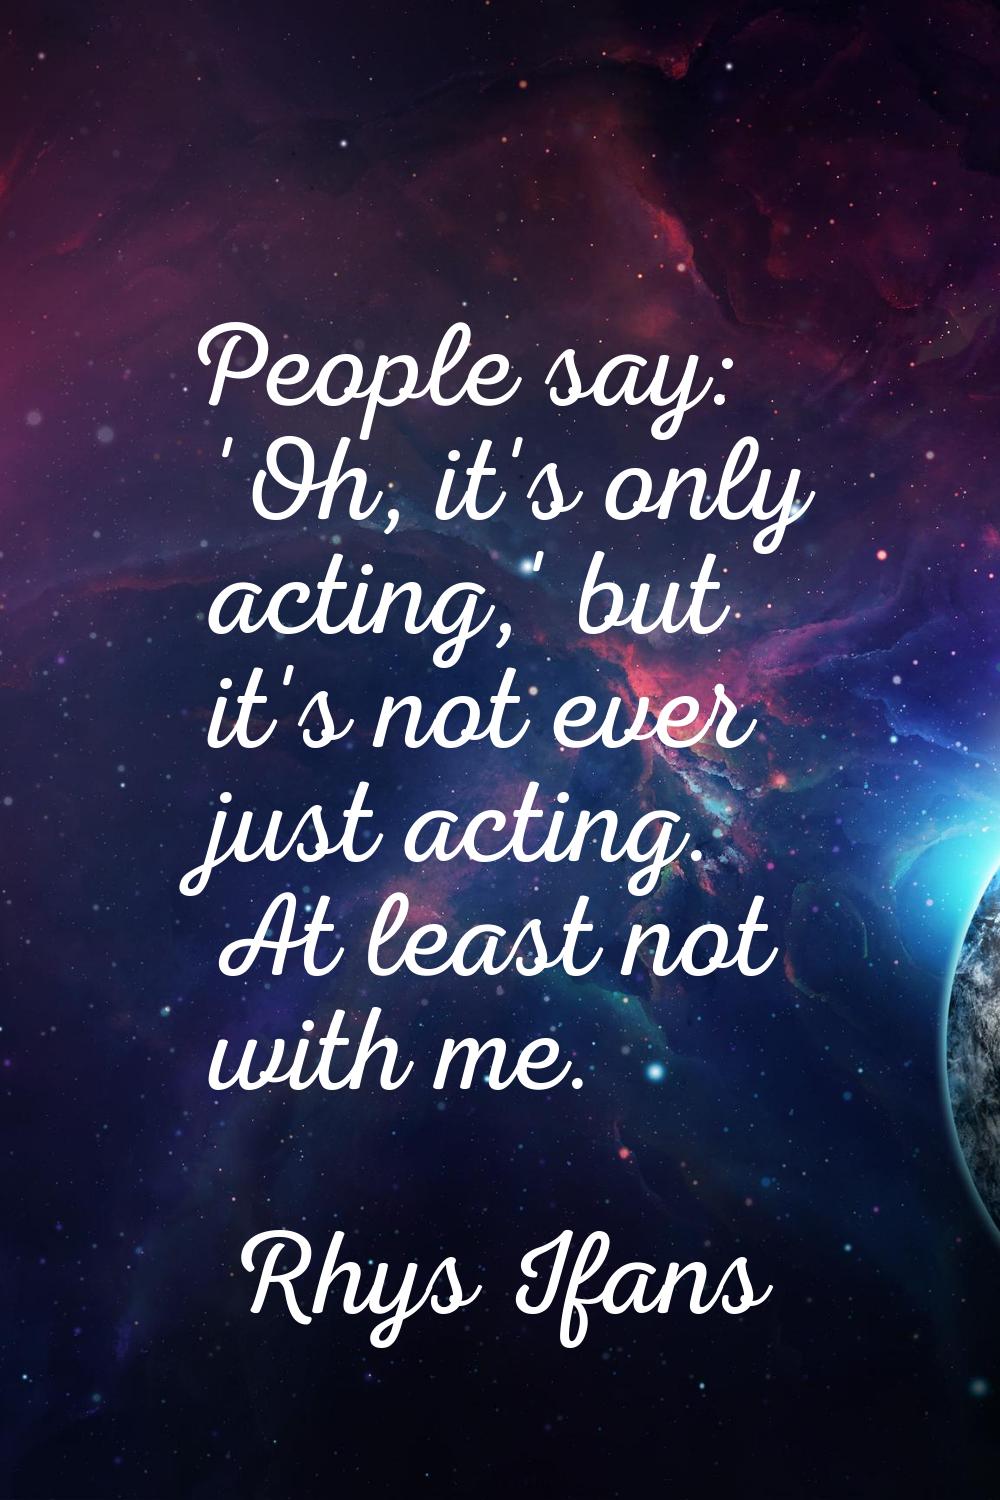 People say: 'Oh, it's only acting,' but it's not ever just acting. At least not with me.